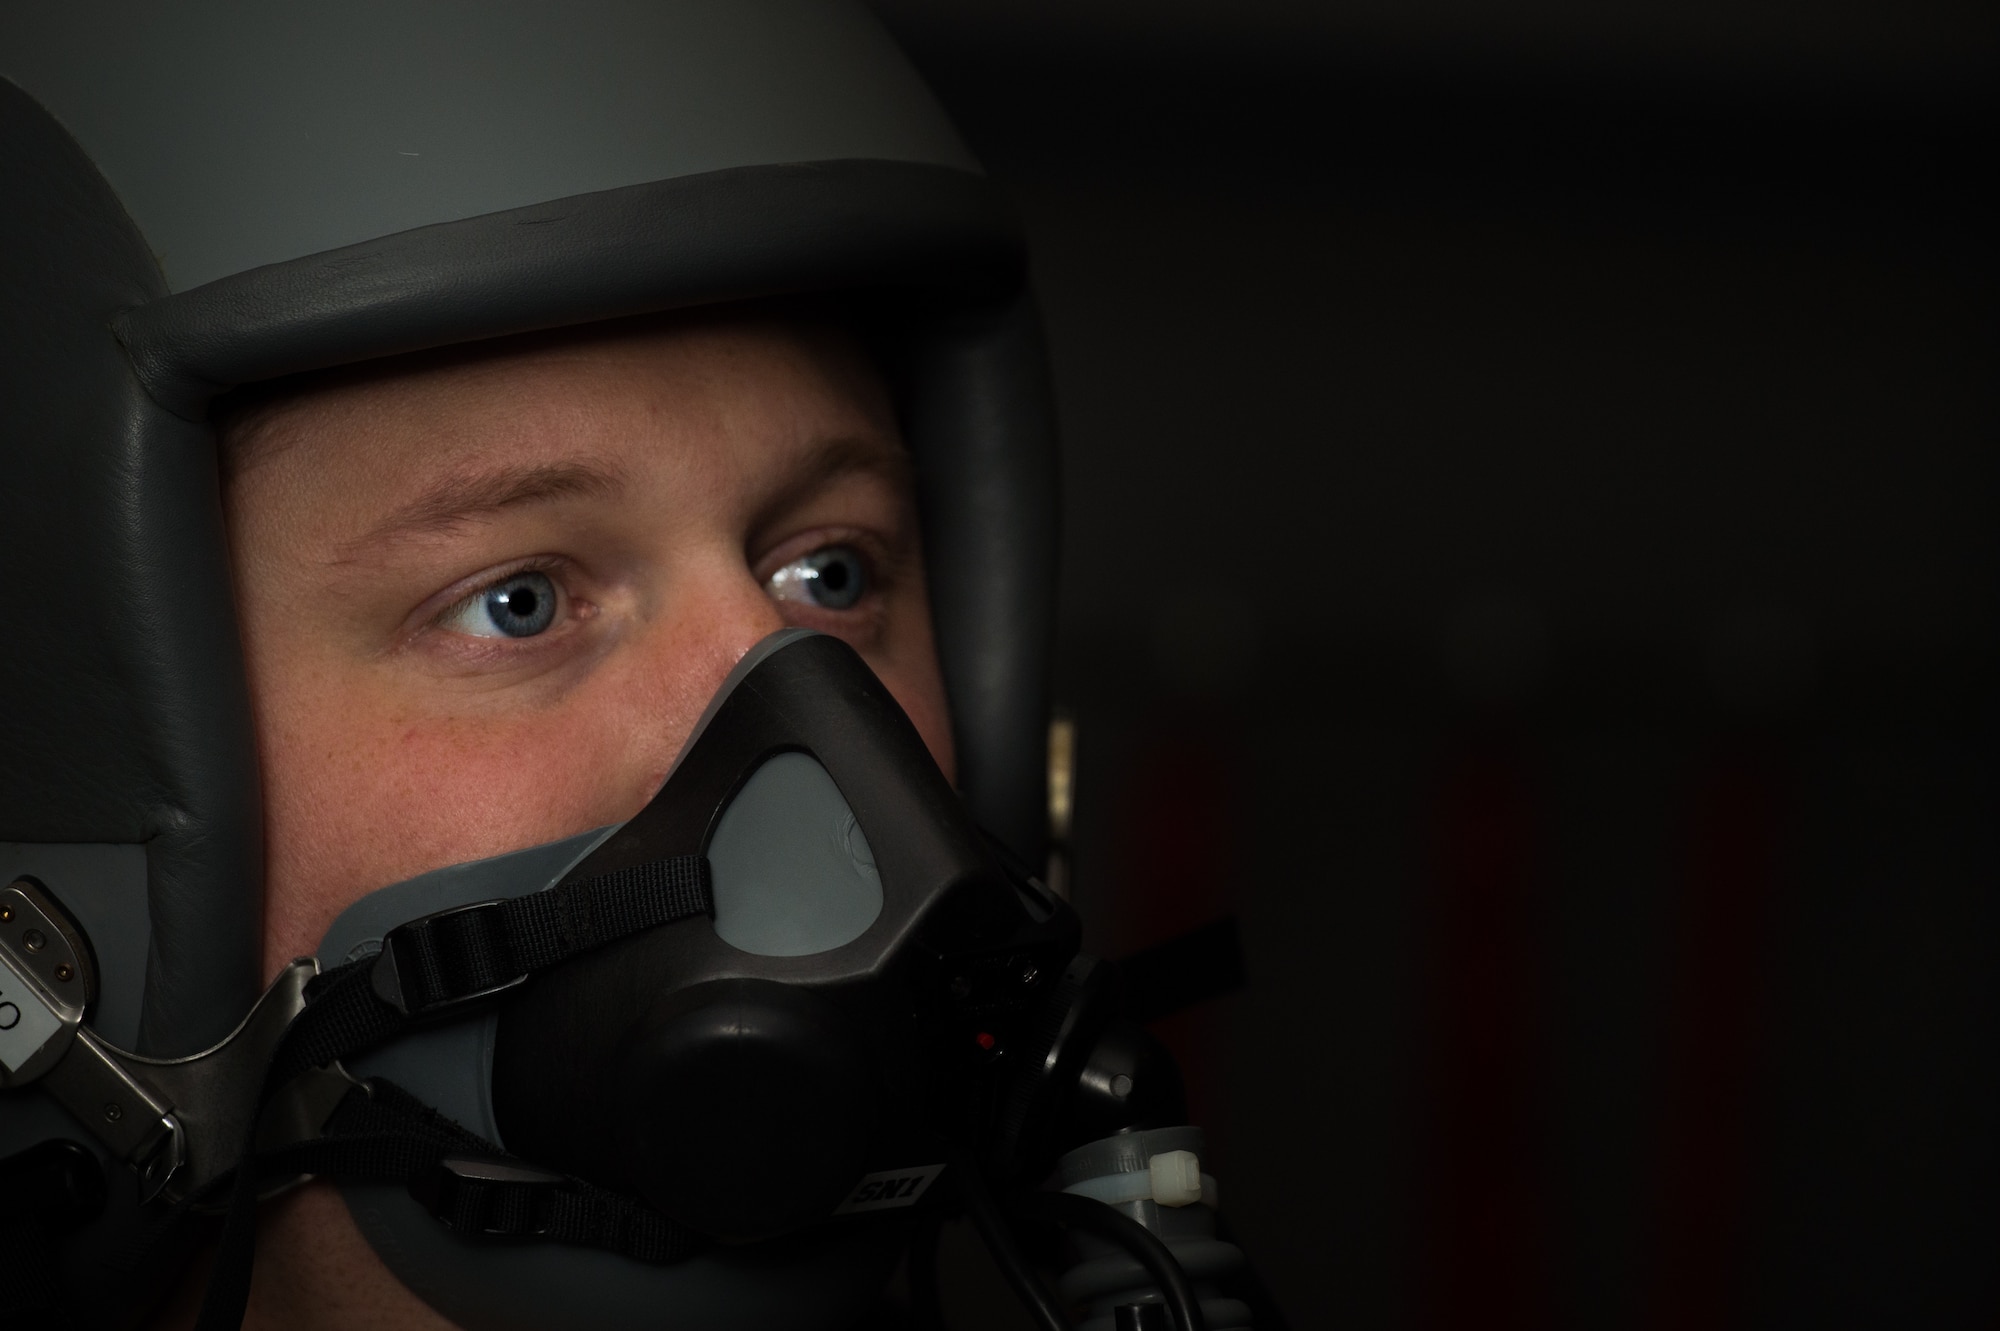 .S. Air Force Cap. “Champ”, 94th Fighter Squadron F-22 Raptor pilot, trains on the Reduced Oxygen Breathing Device at Joint Base Langley-Eustis, Virginia, June 13, 2019.